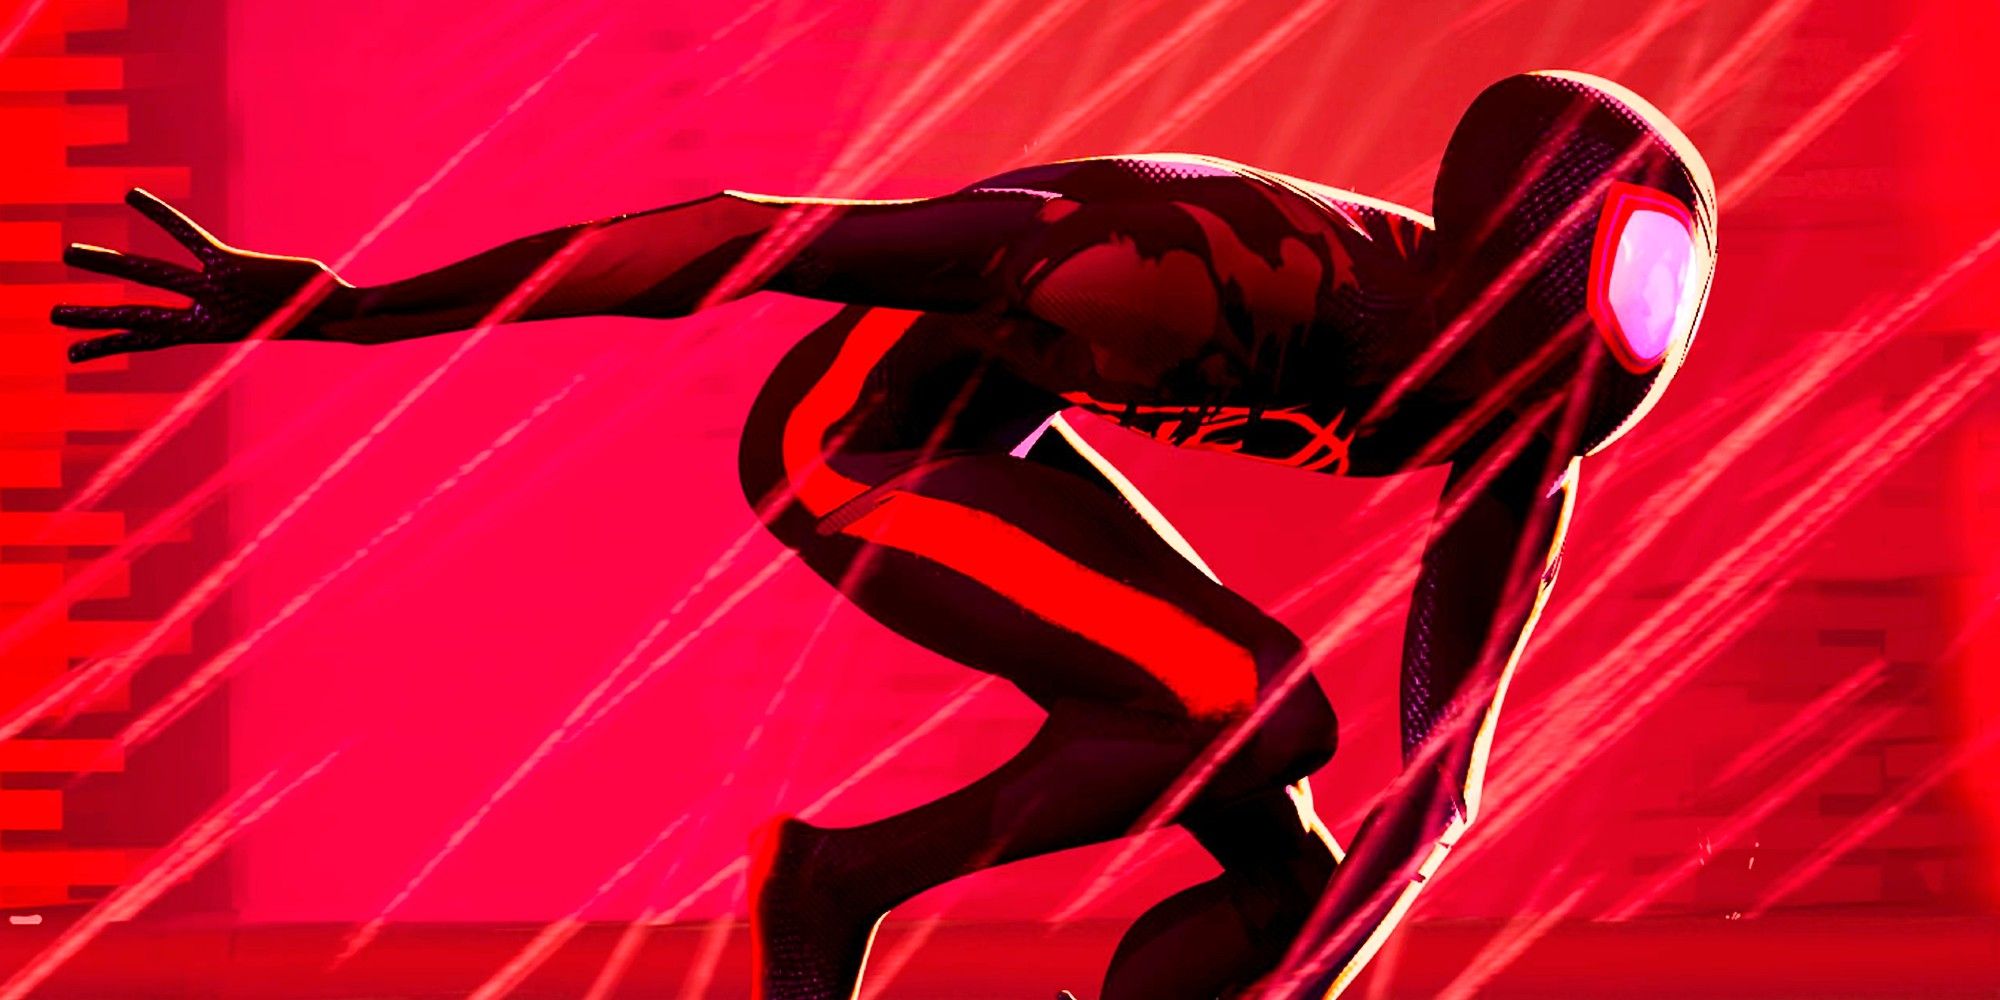 Miles Morales in Spider-Man Across the Spider-Verse